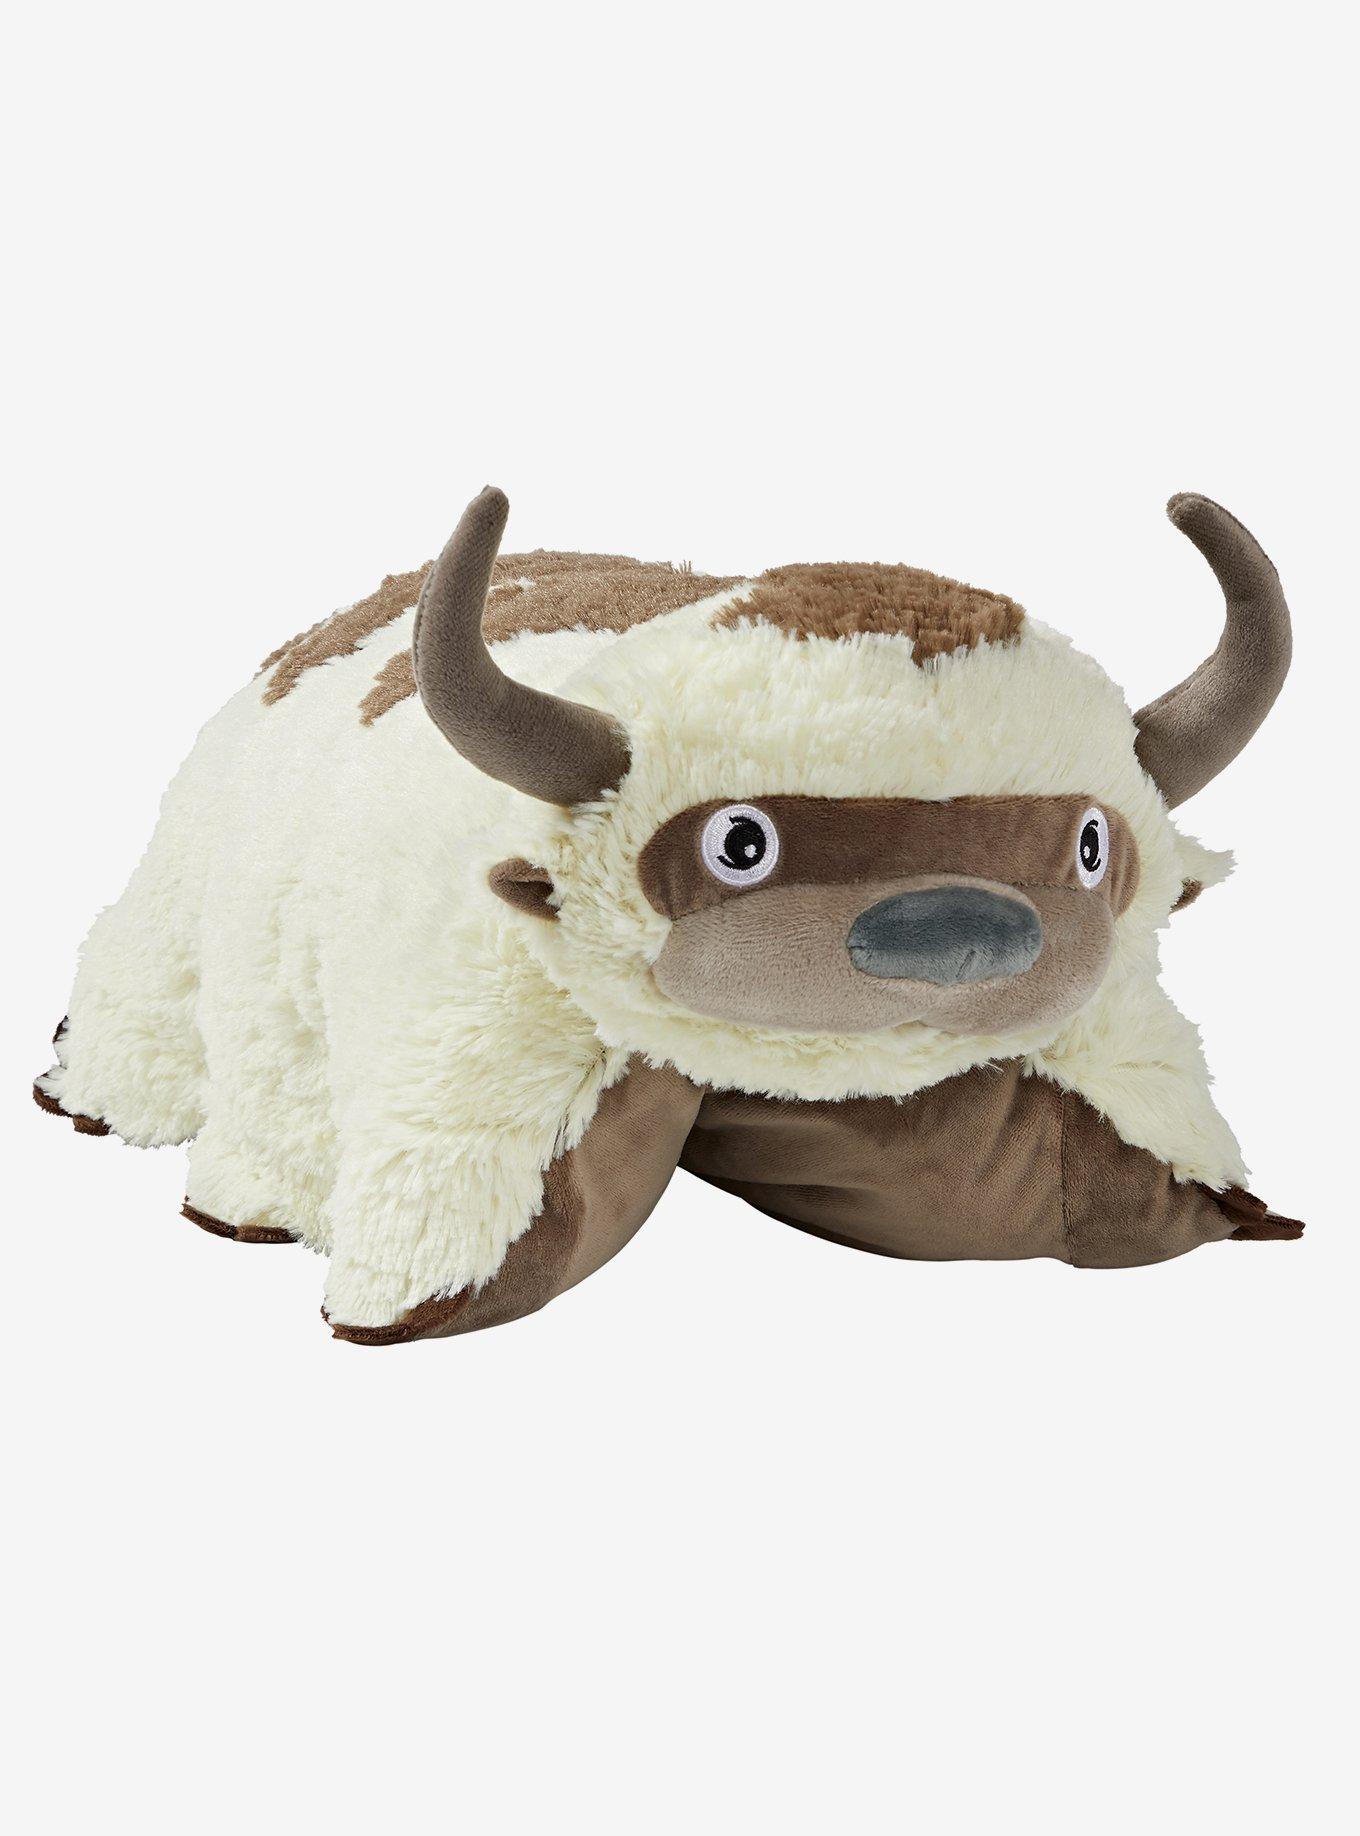 Avatar: The Last Airbender Appa Pillow Pets Plush Toy